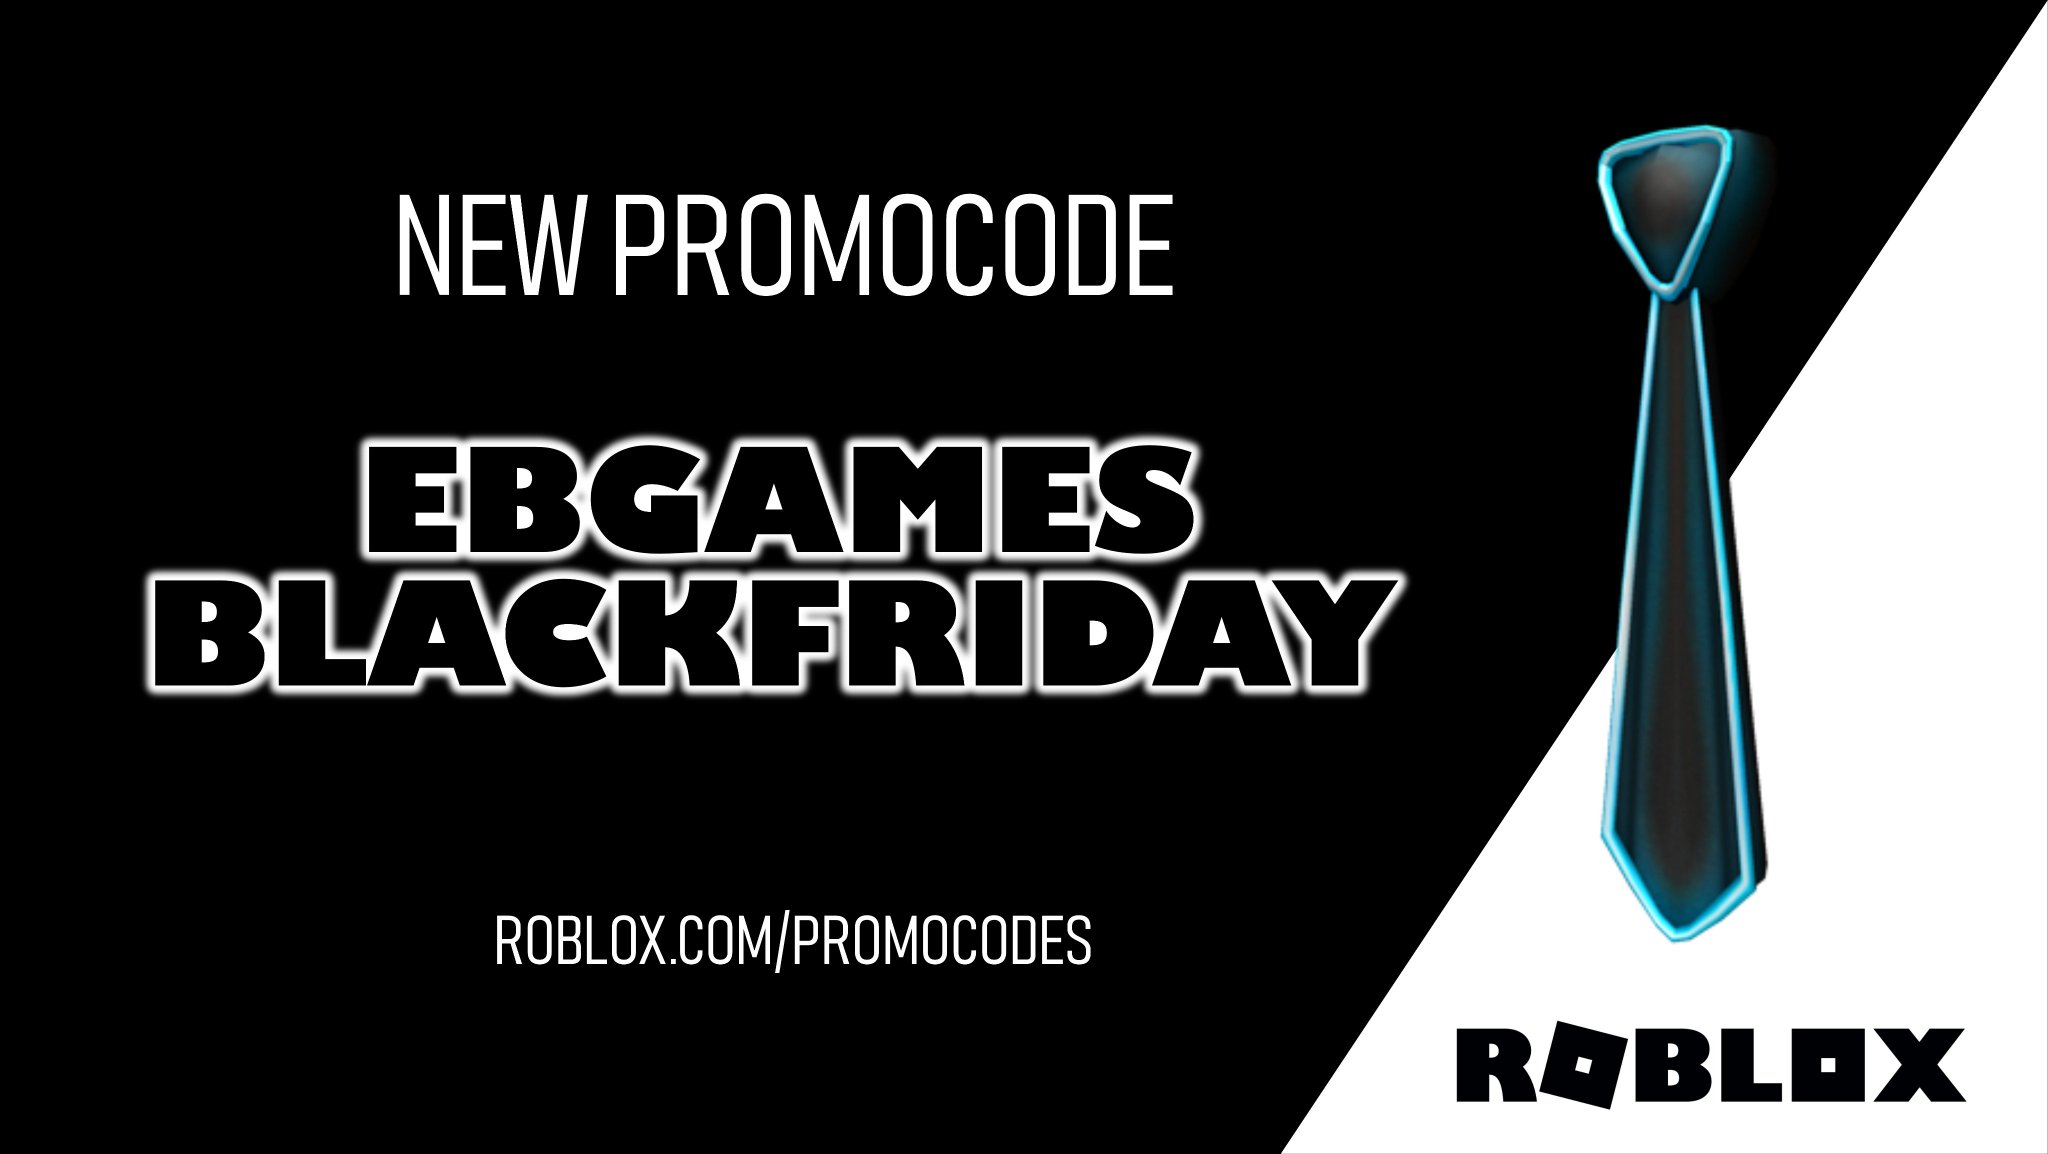 Bloxy News On Twitter New Promocode Use Code Ebgamesblackfriday Over At Https T Co 7qvdjgejbm To Earn Yourself The Neon Blue Tie Roblox Https T Co Abhsbrxwzh - neon blue tie code roblox